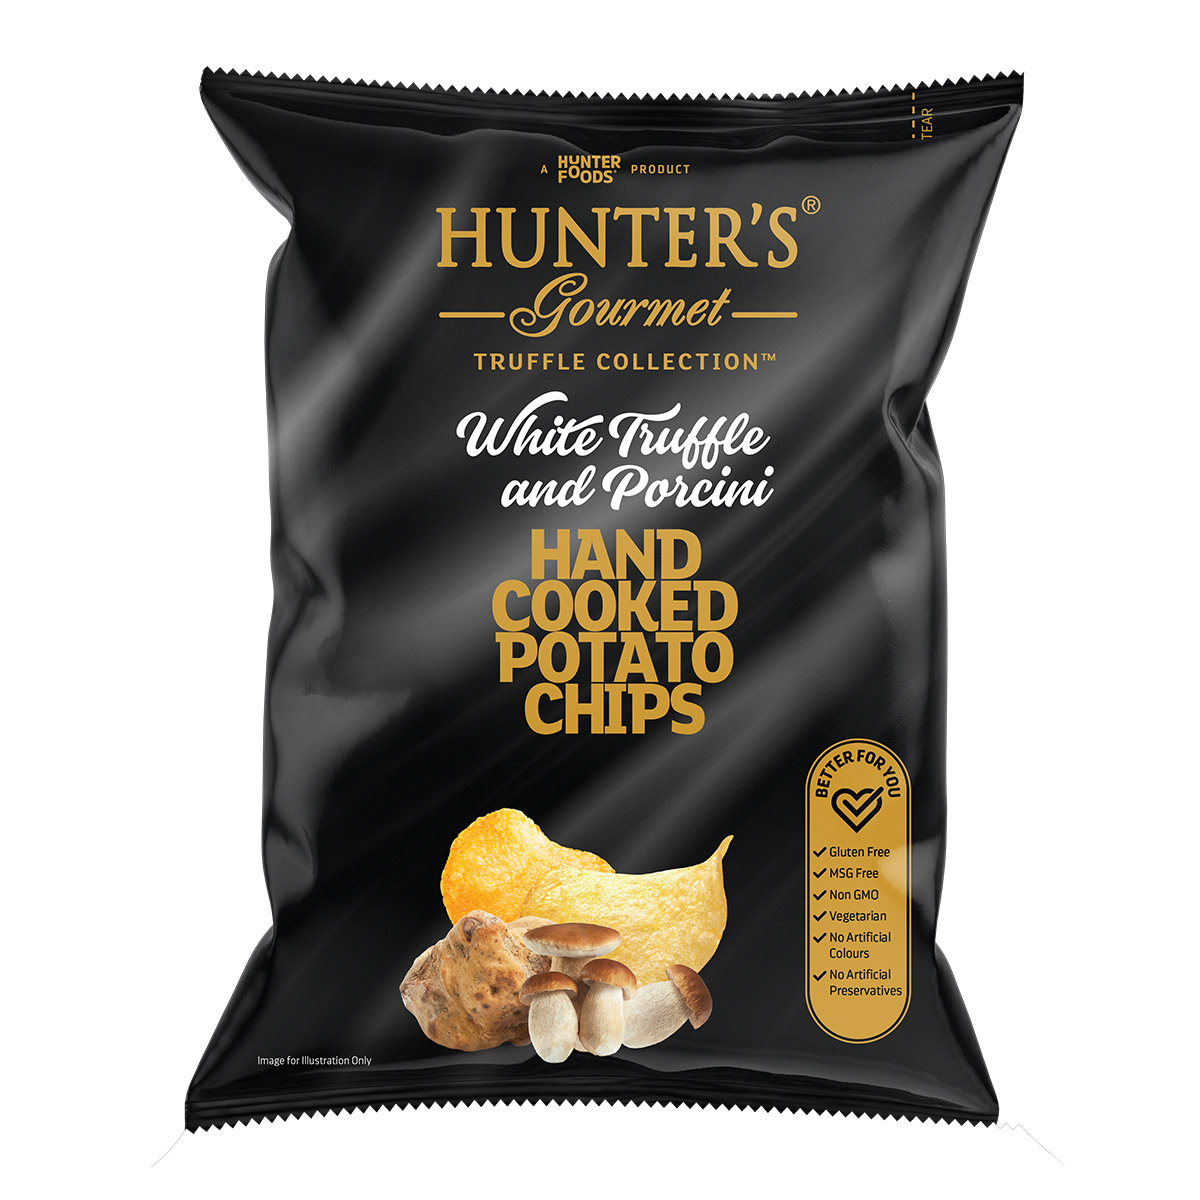 Hunter’s Gourmet Hand Cooked Potato Chips – Black Truffle and Parmesan – Truffle Collection (125gm)